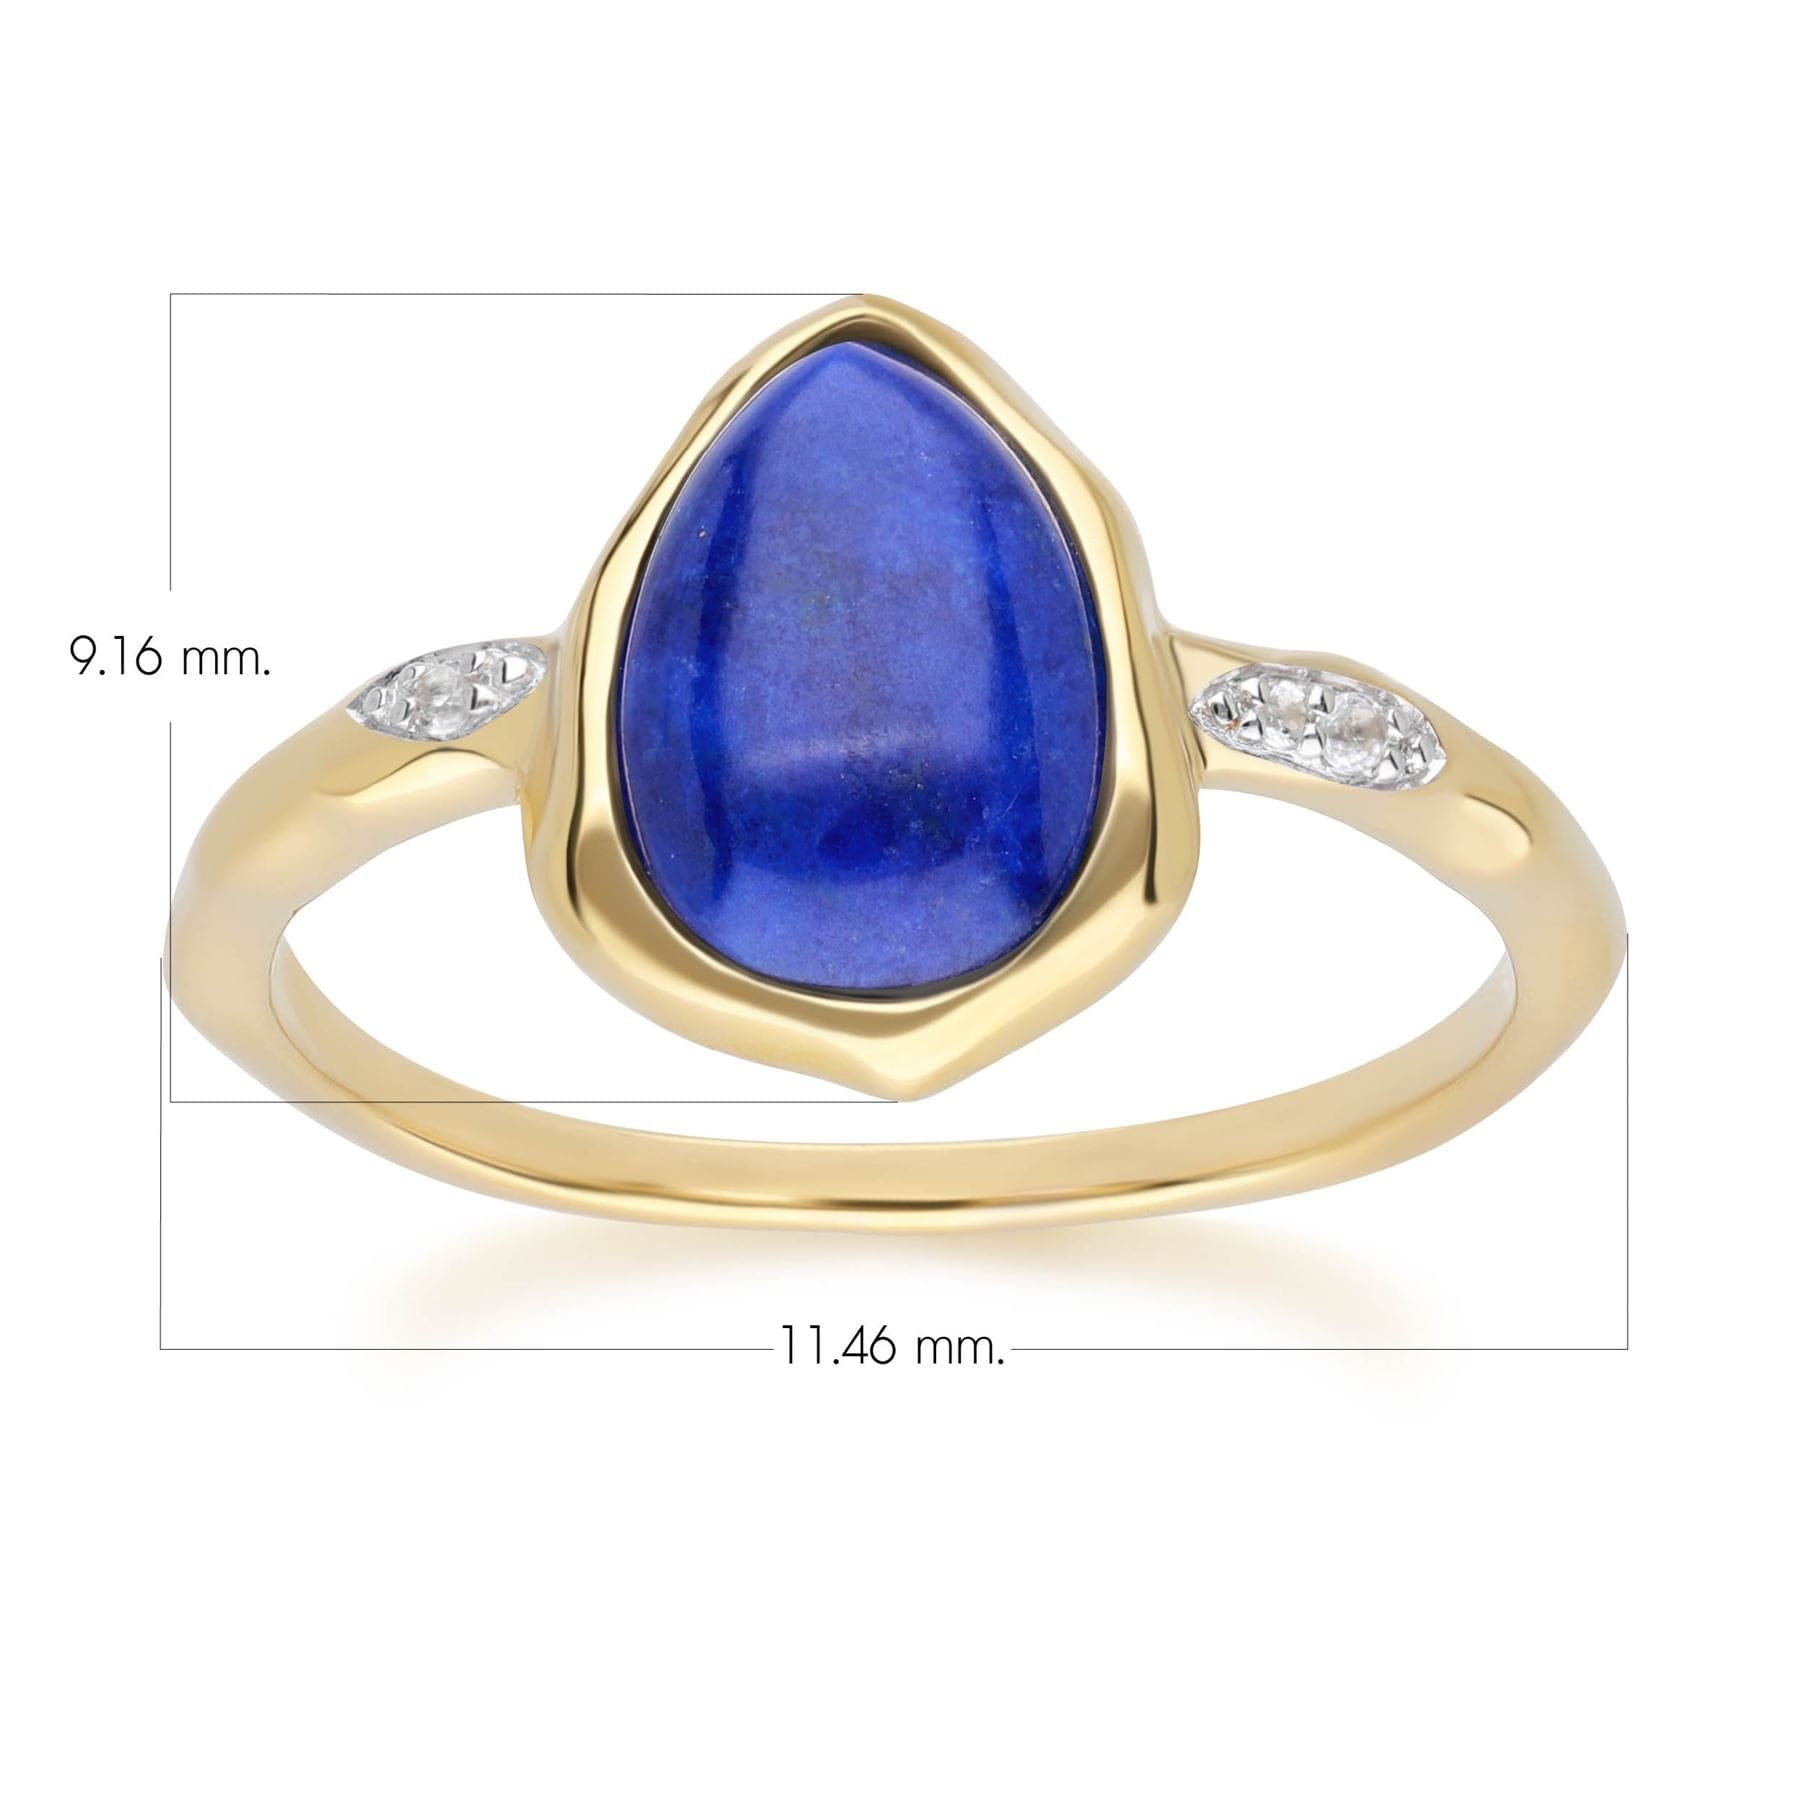 Irregular Lapis Lazuli & Topaz Ring In 18ct Gold Plated SterlIng Silver